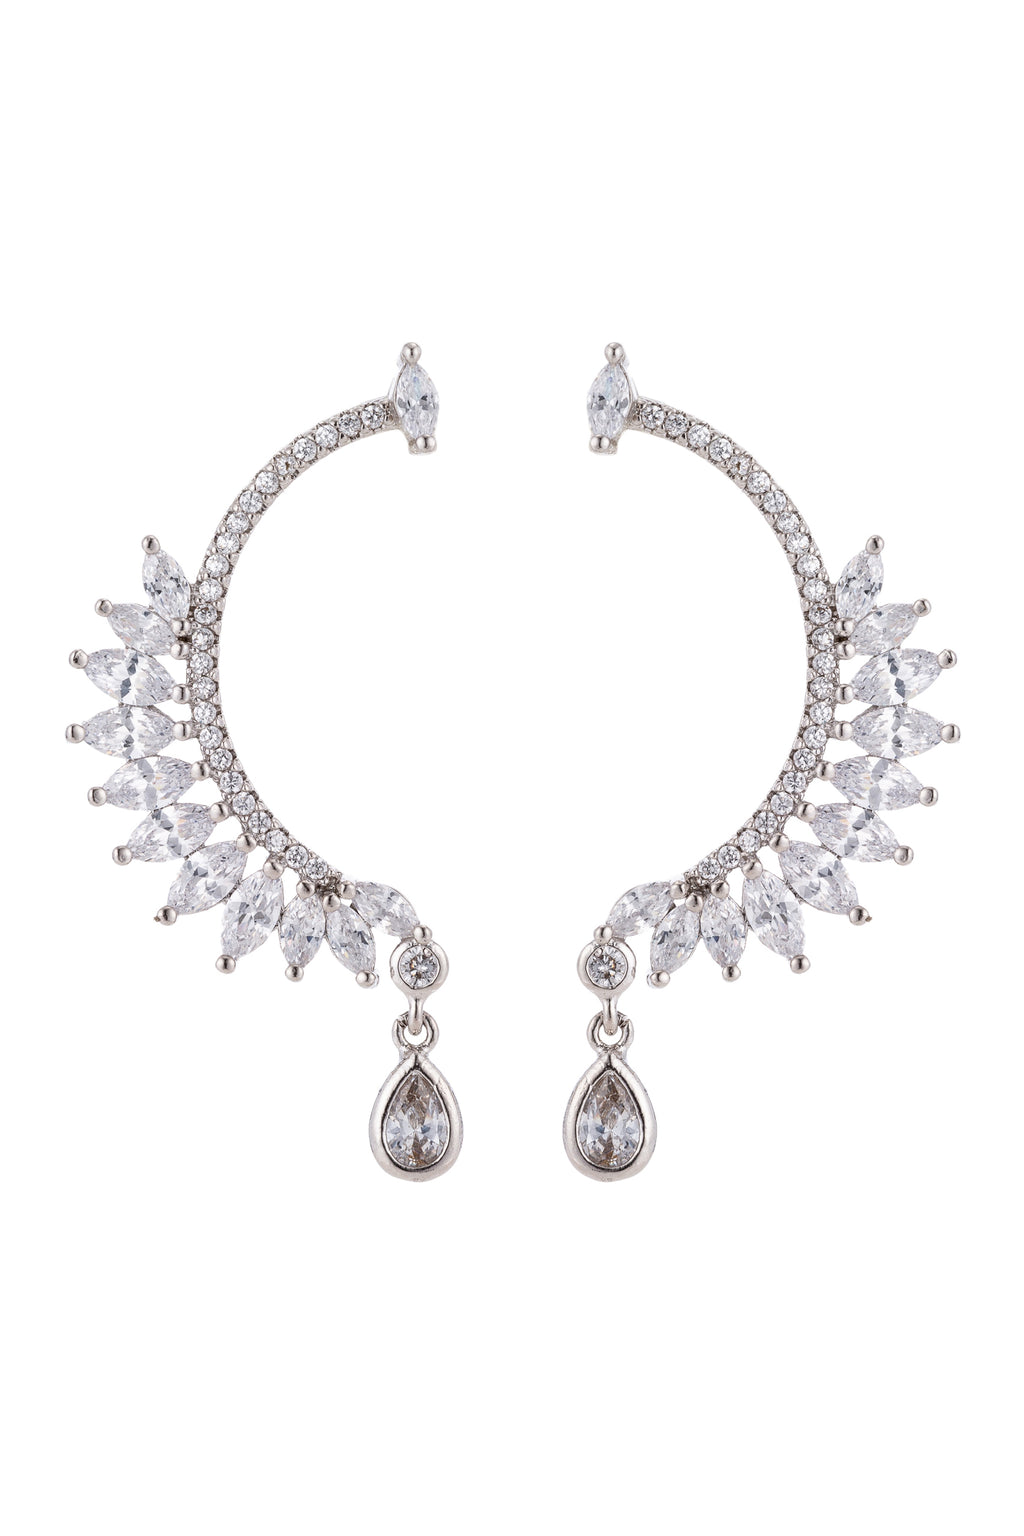 Ear cuff earrings studded with CZ crystals.